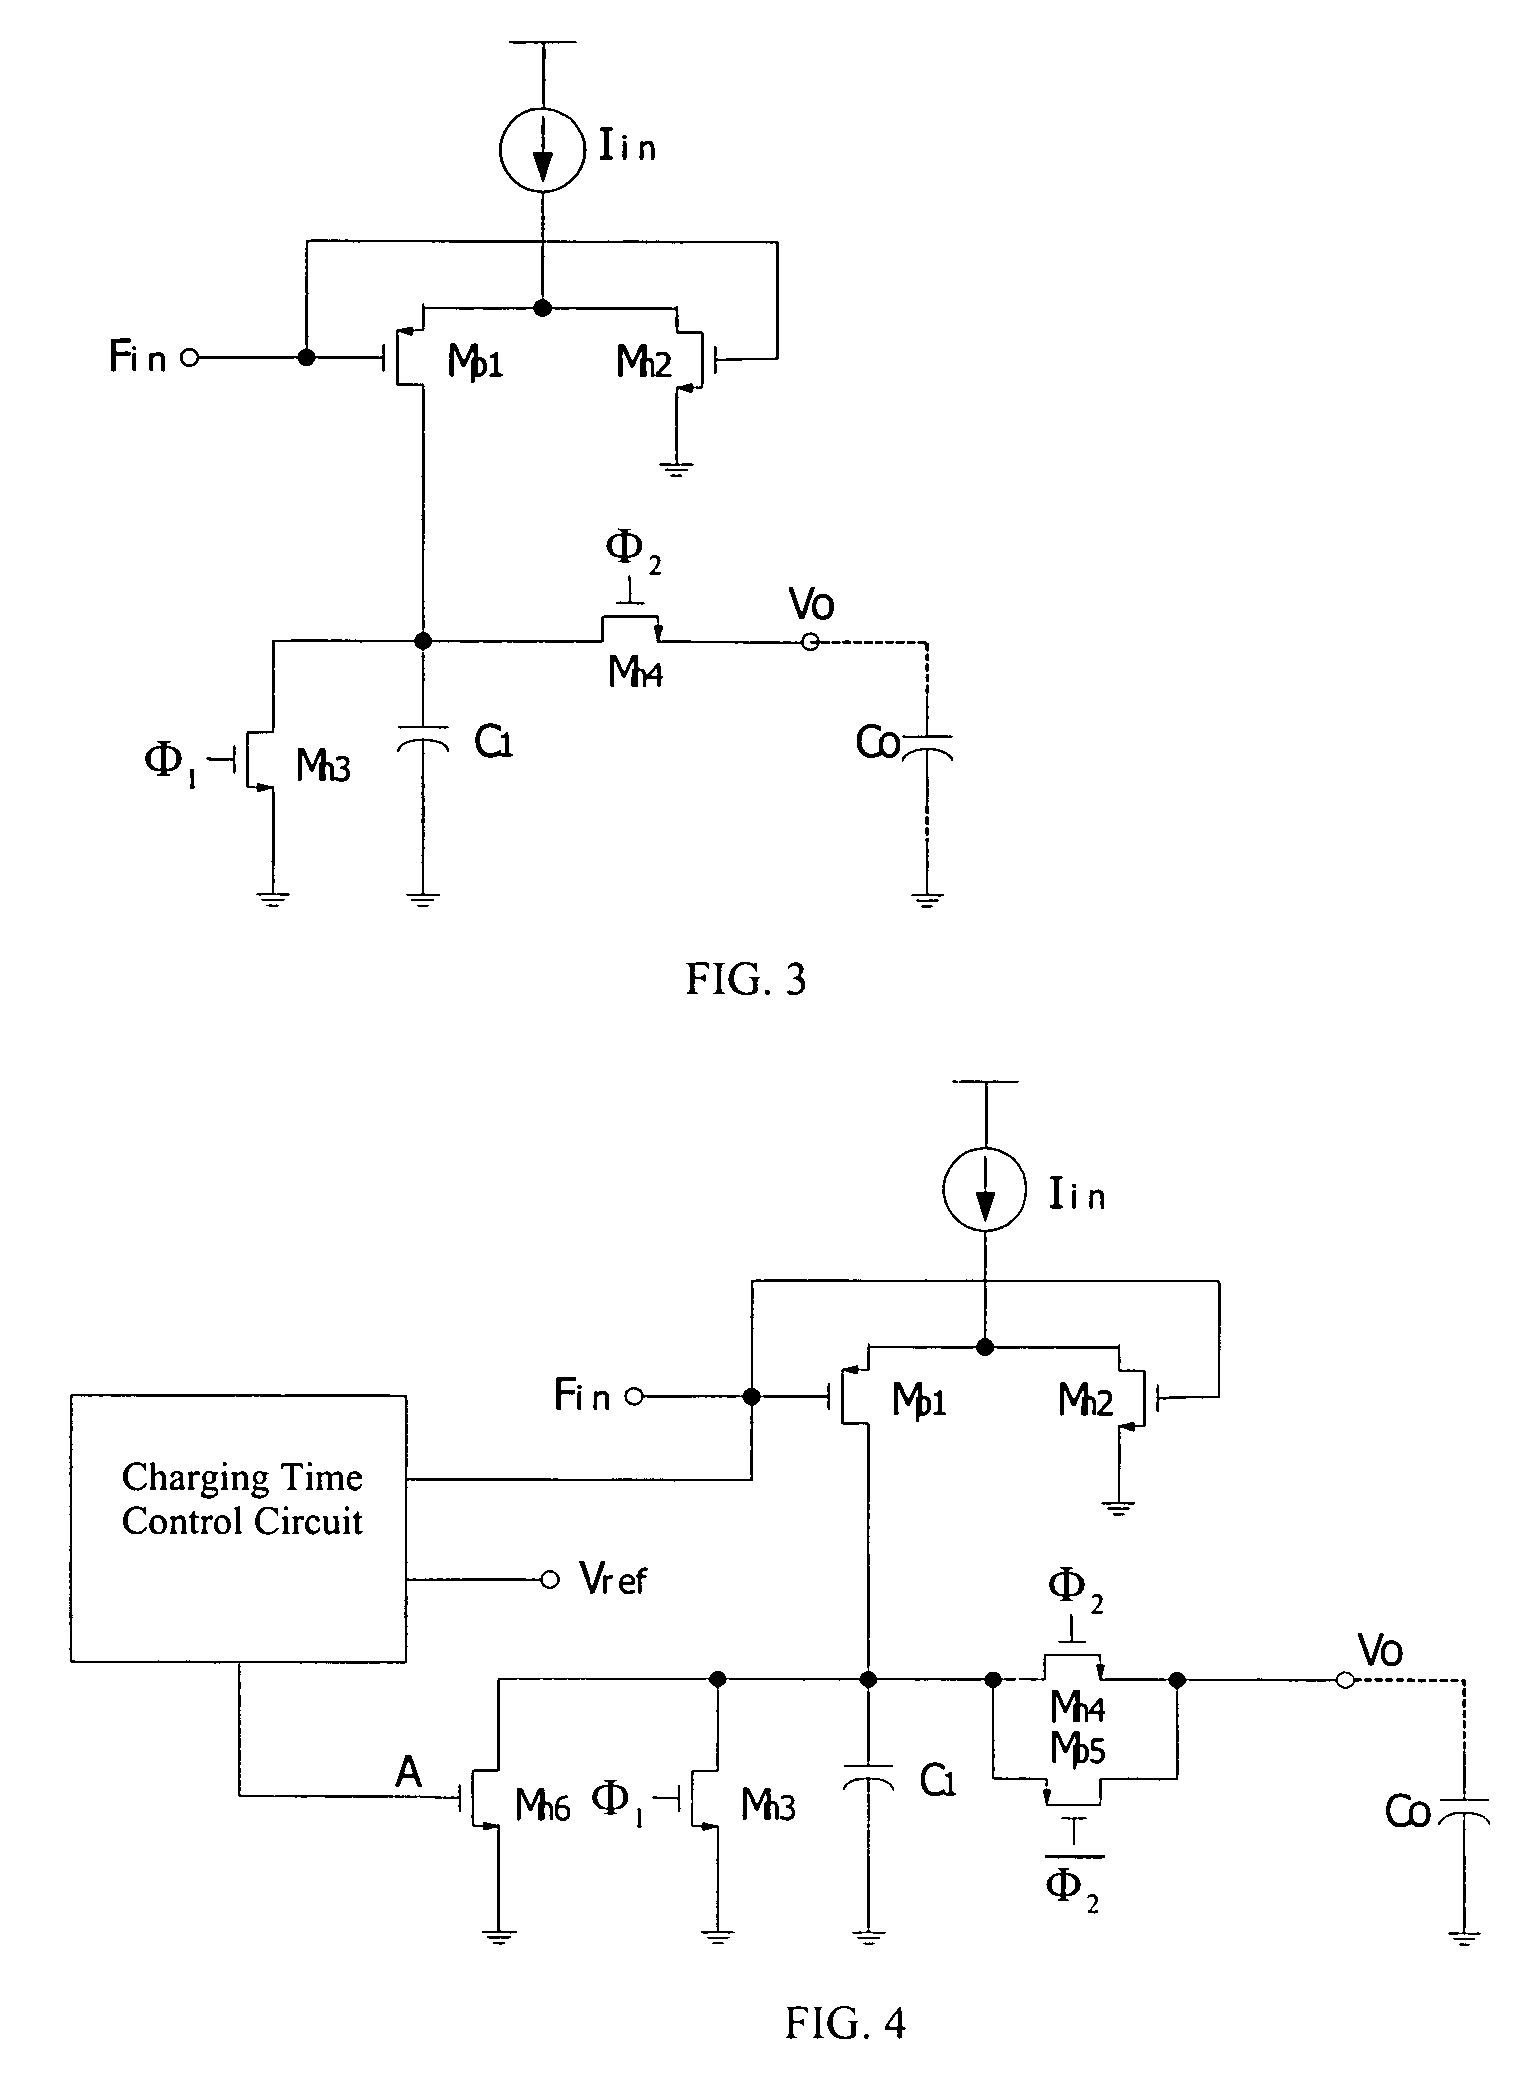 Binary frequency-shift keying demodulator and frequency-to-voltage converter